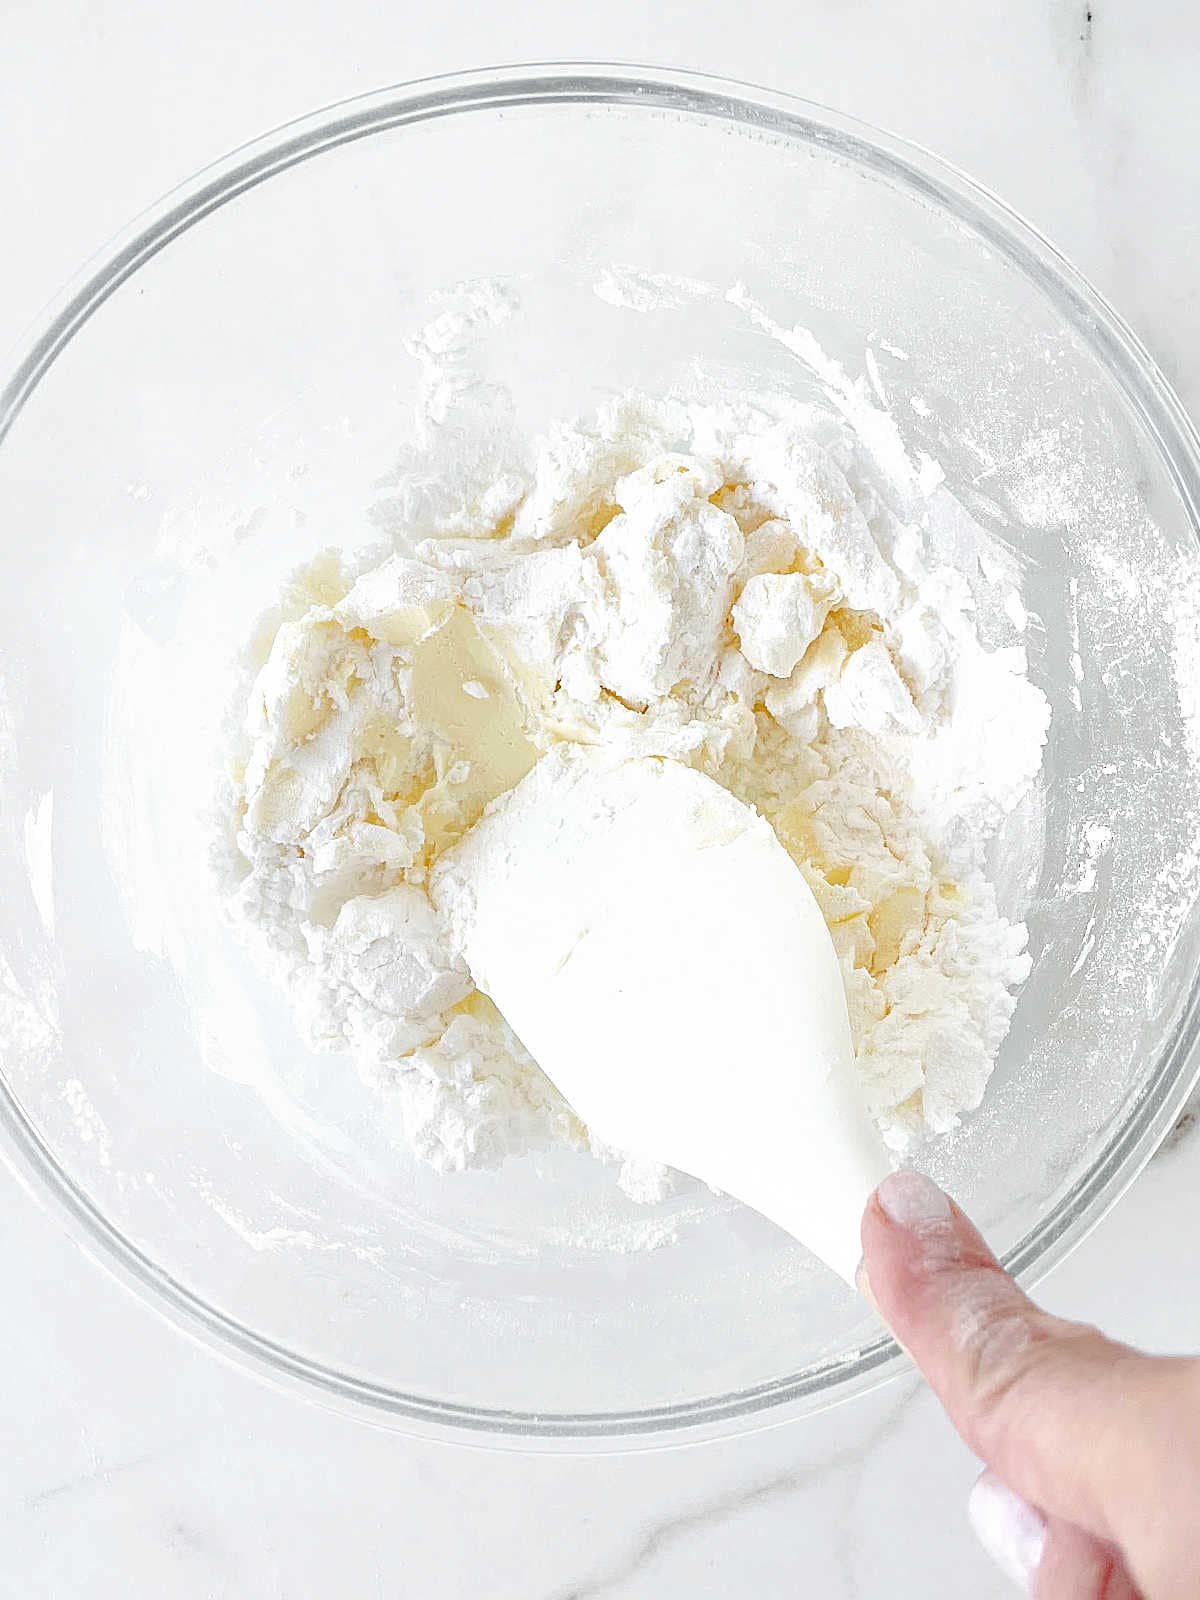 Integrating flour into cookie dough mixture in a glass bowl on a white surface with white spatula.